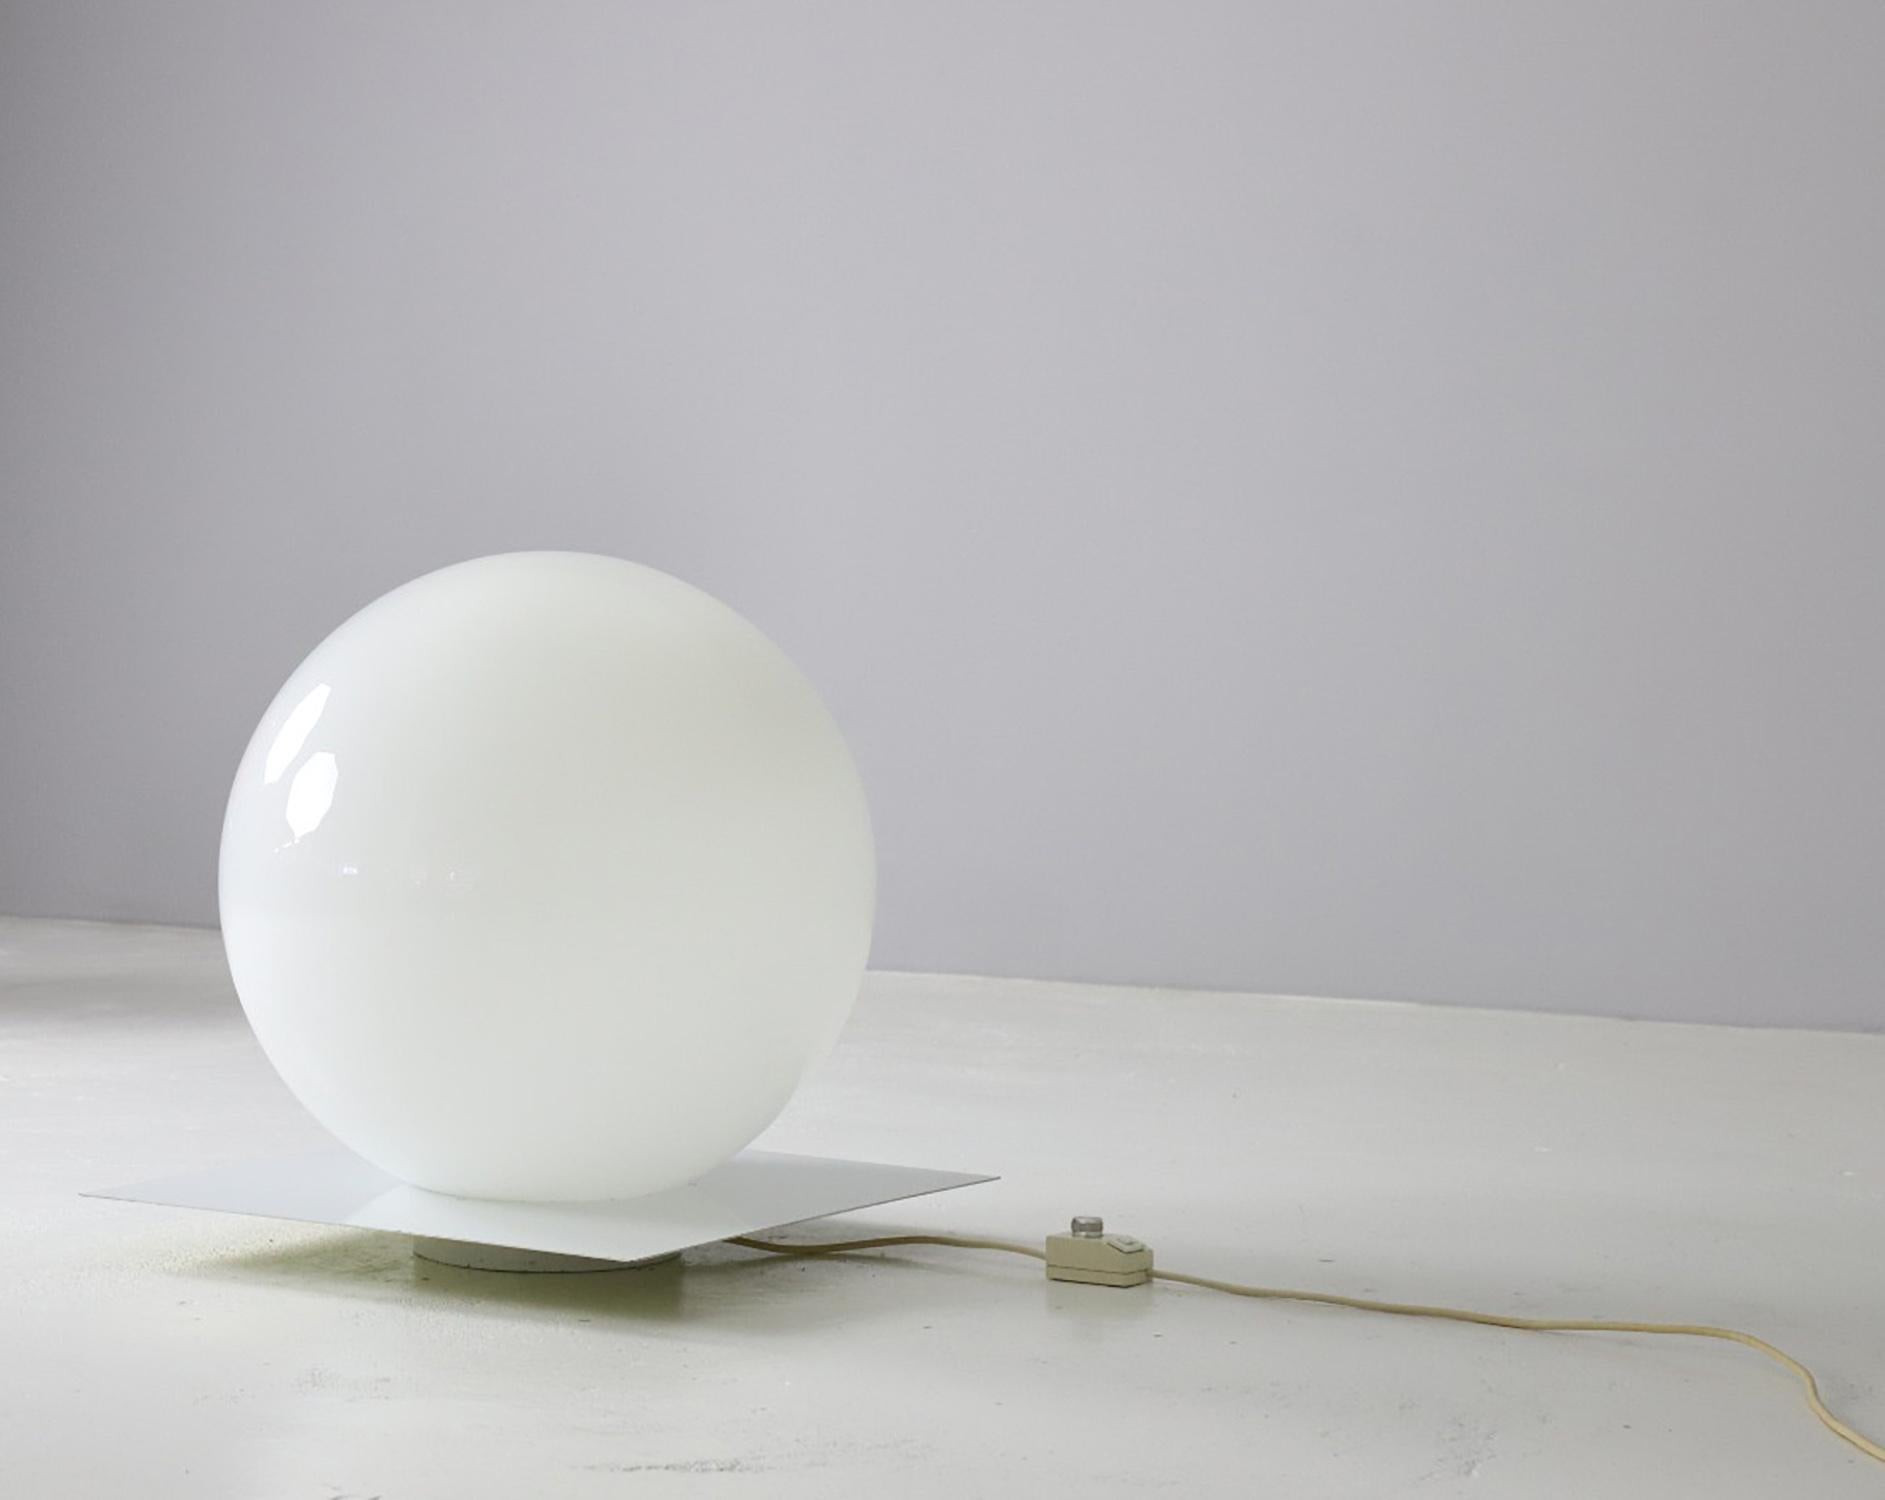 The Micol lamp was designed by Sergio Mazza and Giuliana Gramigna for Quattriflolio, Italy, in 1971. It consists of a hand-blown Murano glass shade supported by a white metal grilled plate. The version of the Micol lamp with the white base is very